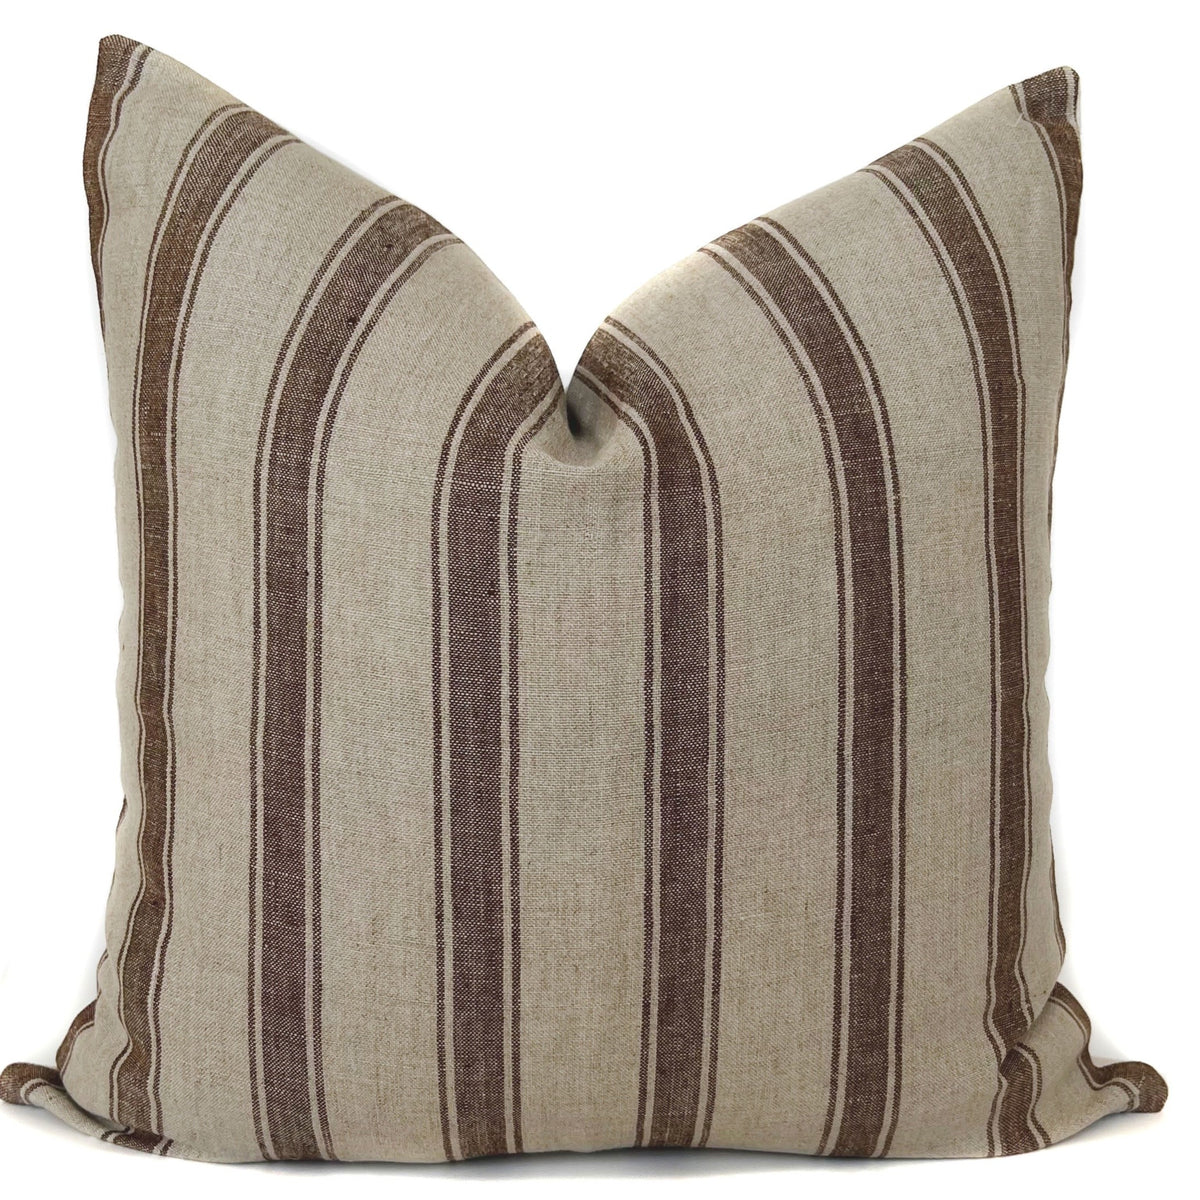 Rust and Beige Striped Pillow Cover